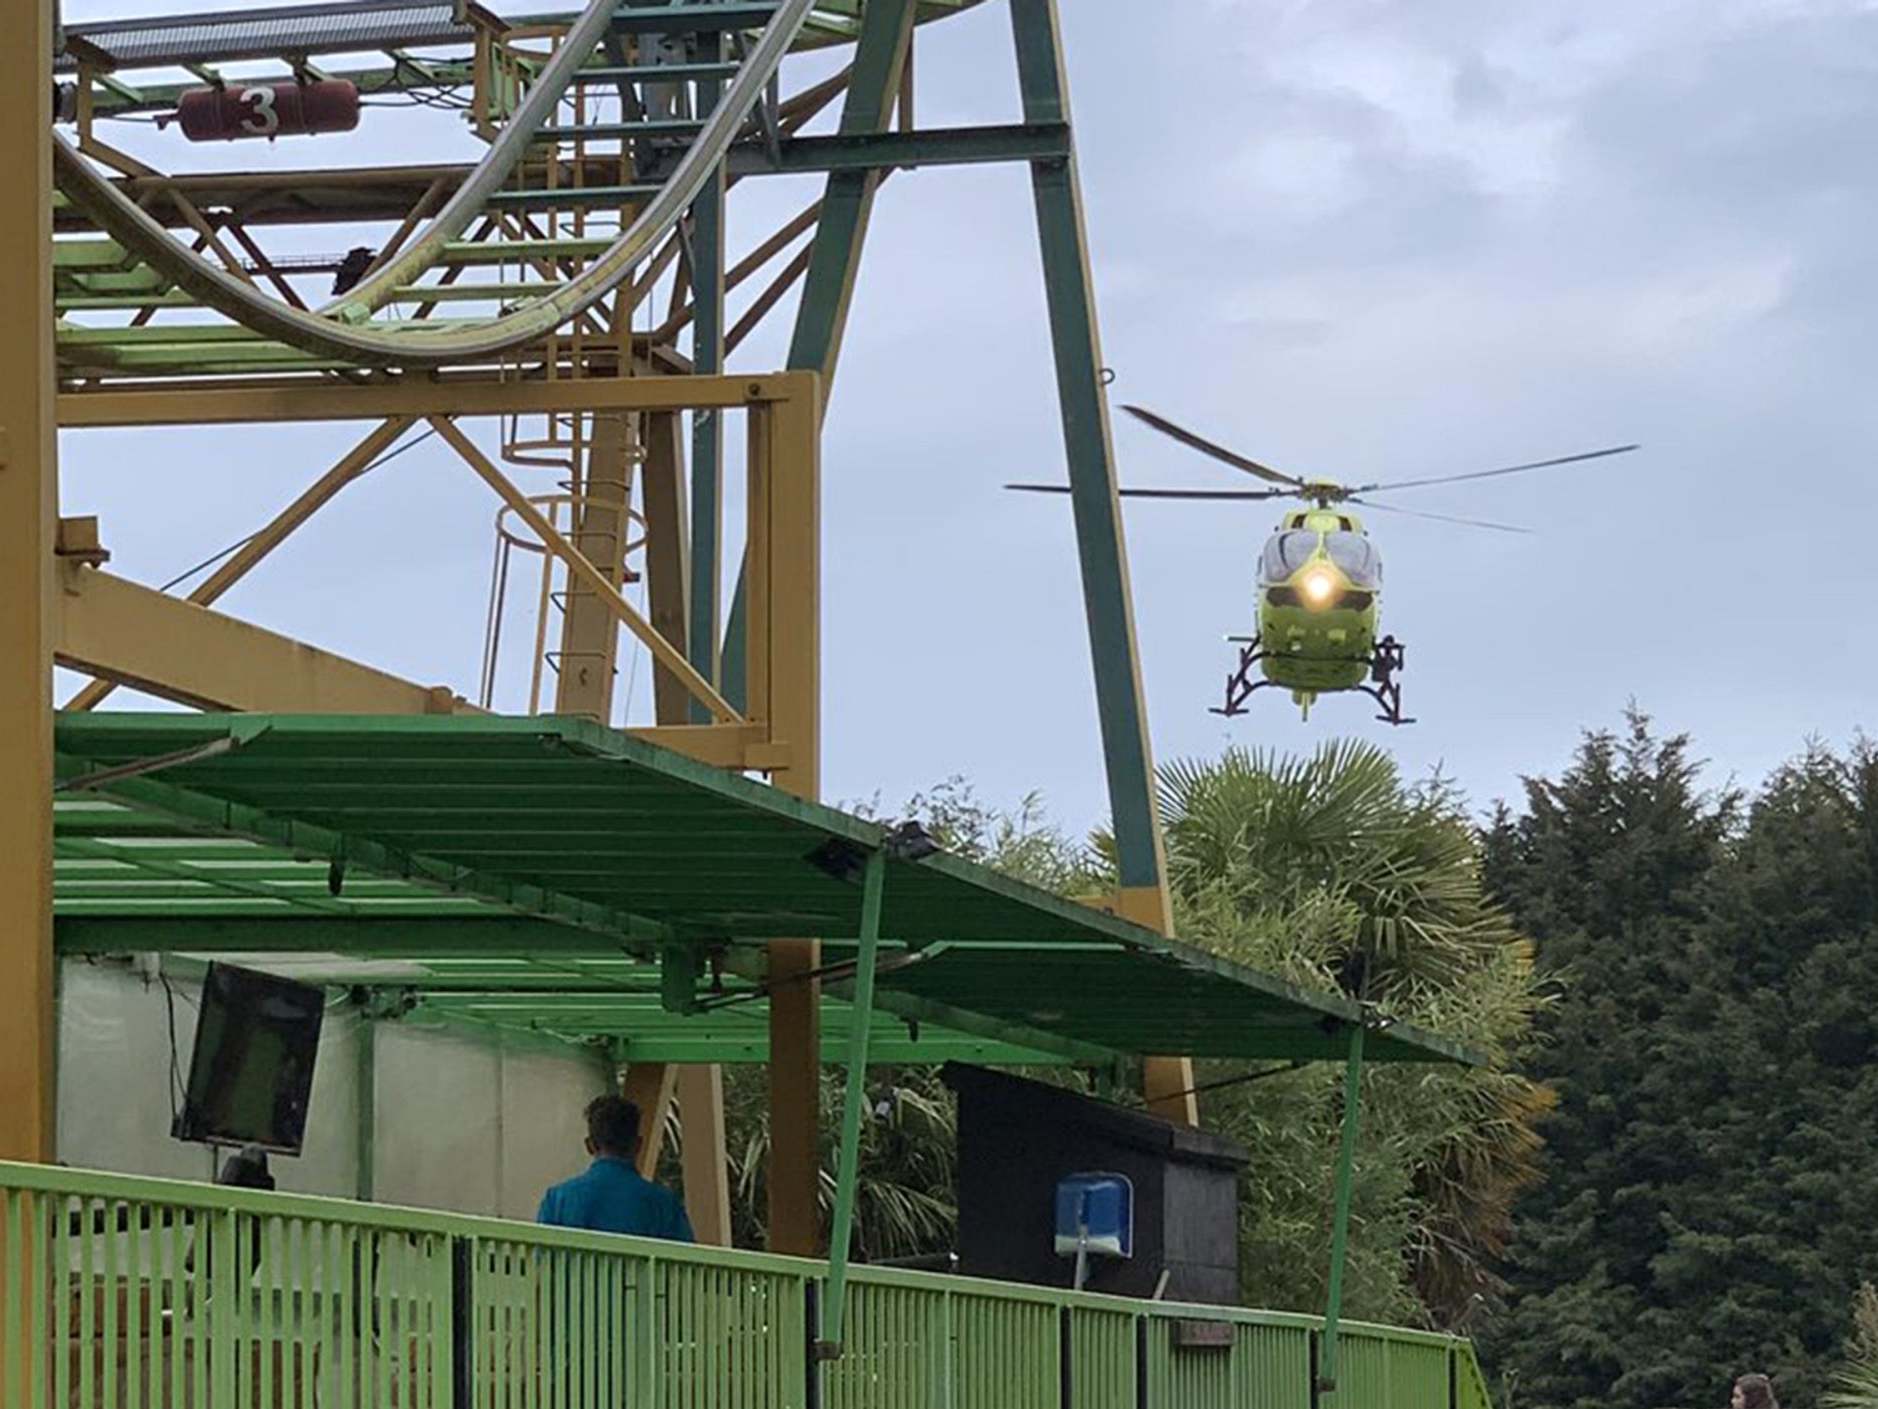 Lightwater Valley theme park: Six-year-old boy who fell off rollercoaster airlifted to hospital